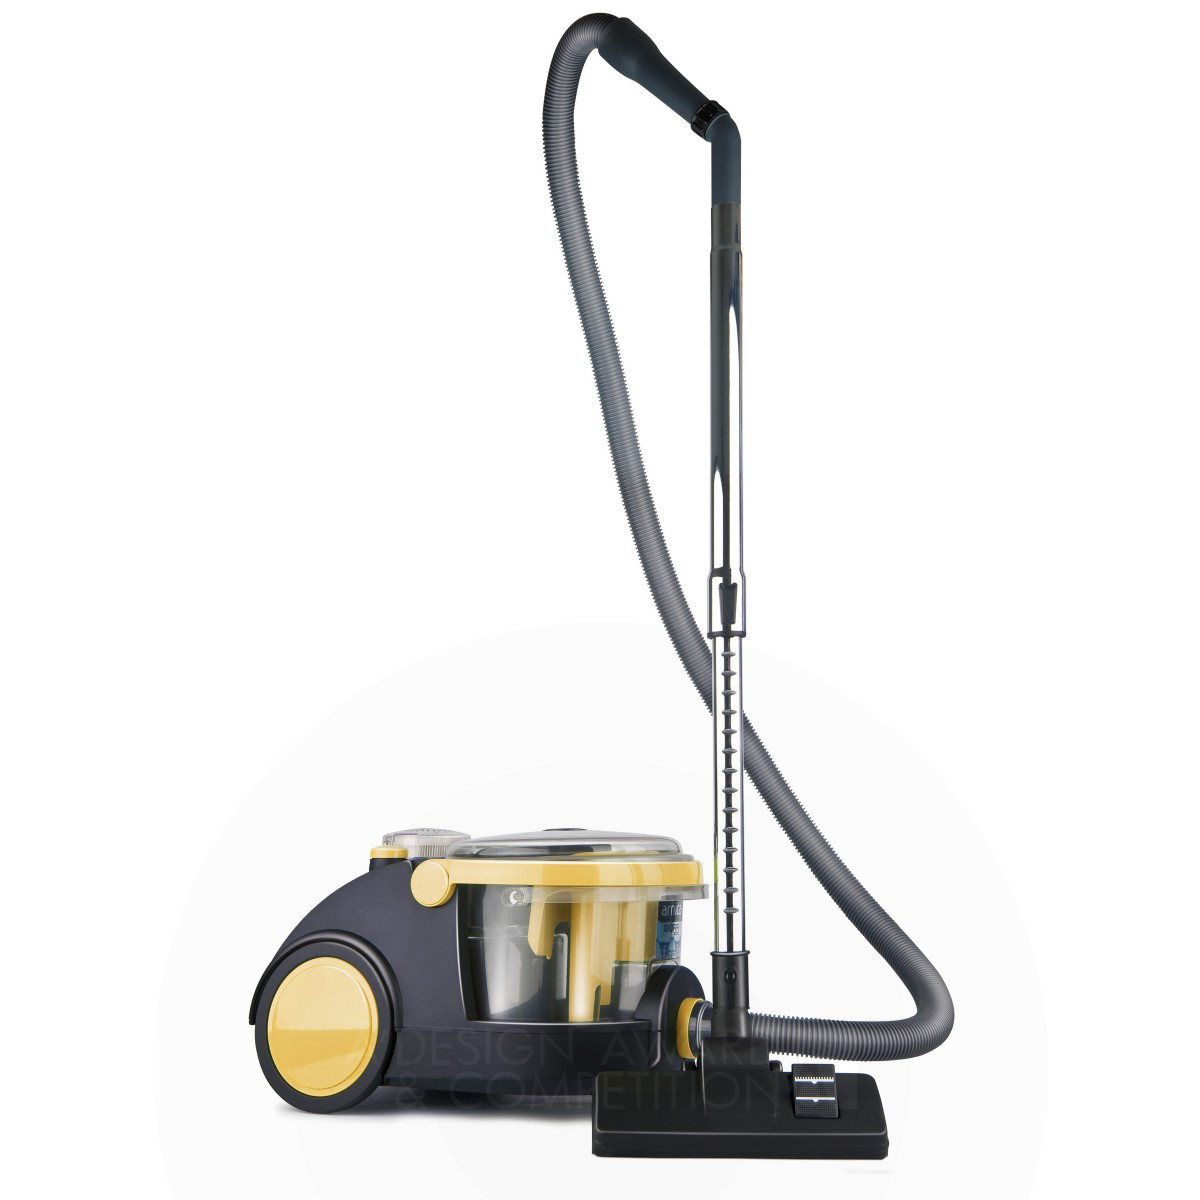 Arnica Bora <b>vacuum cleaner with water filter